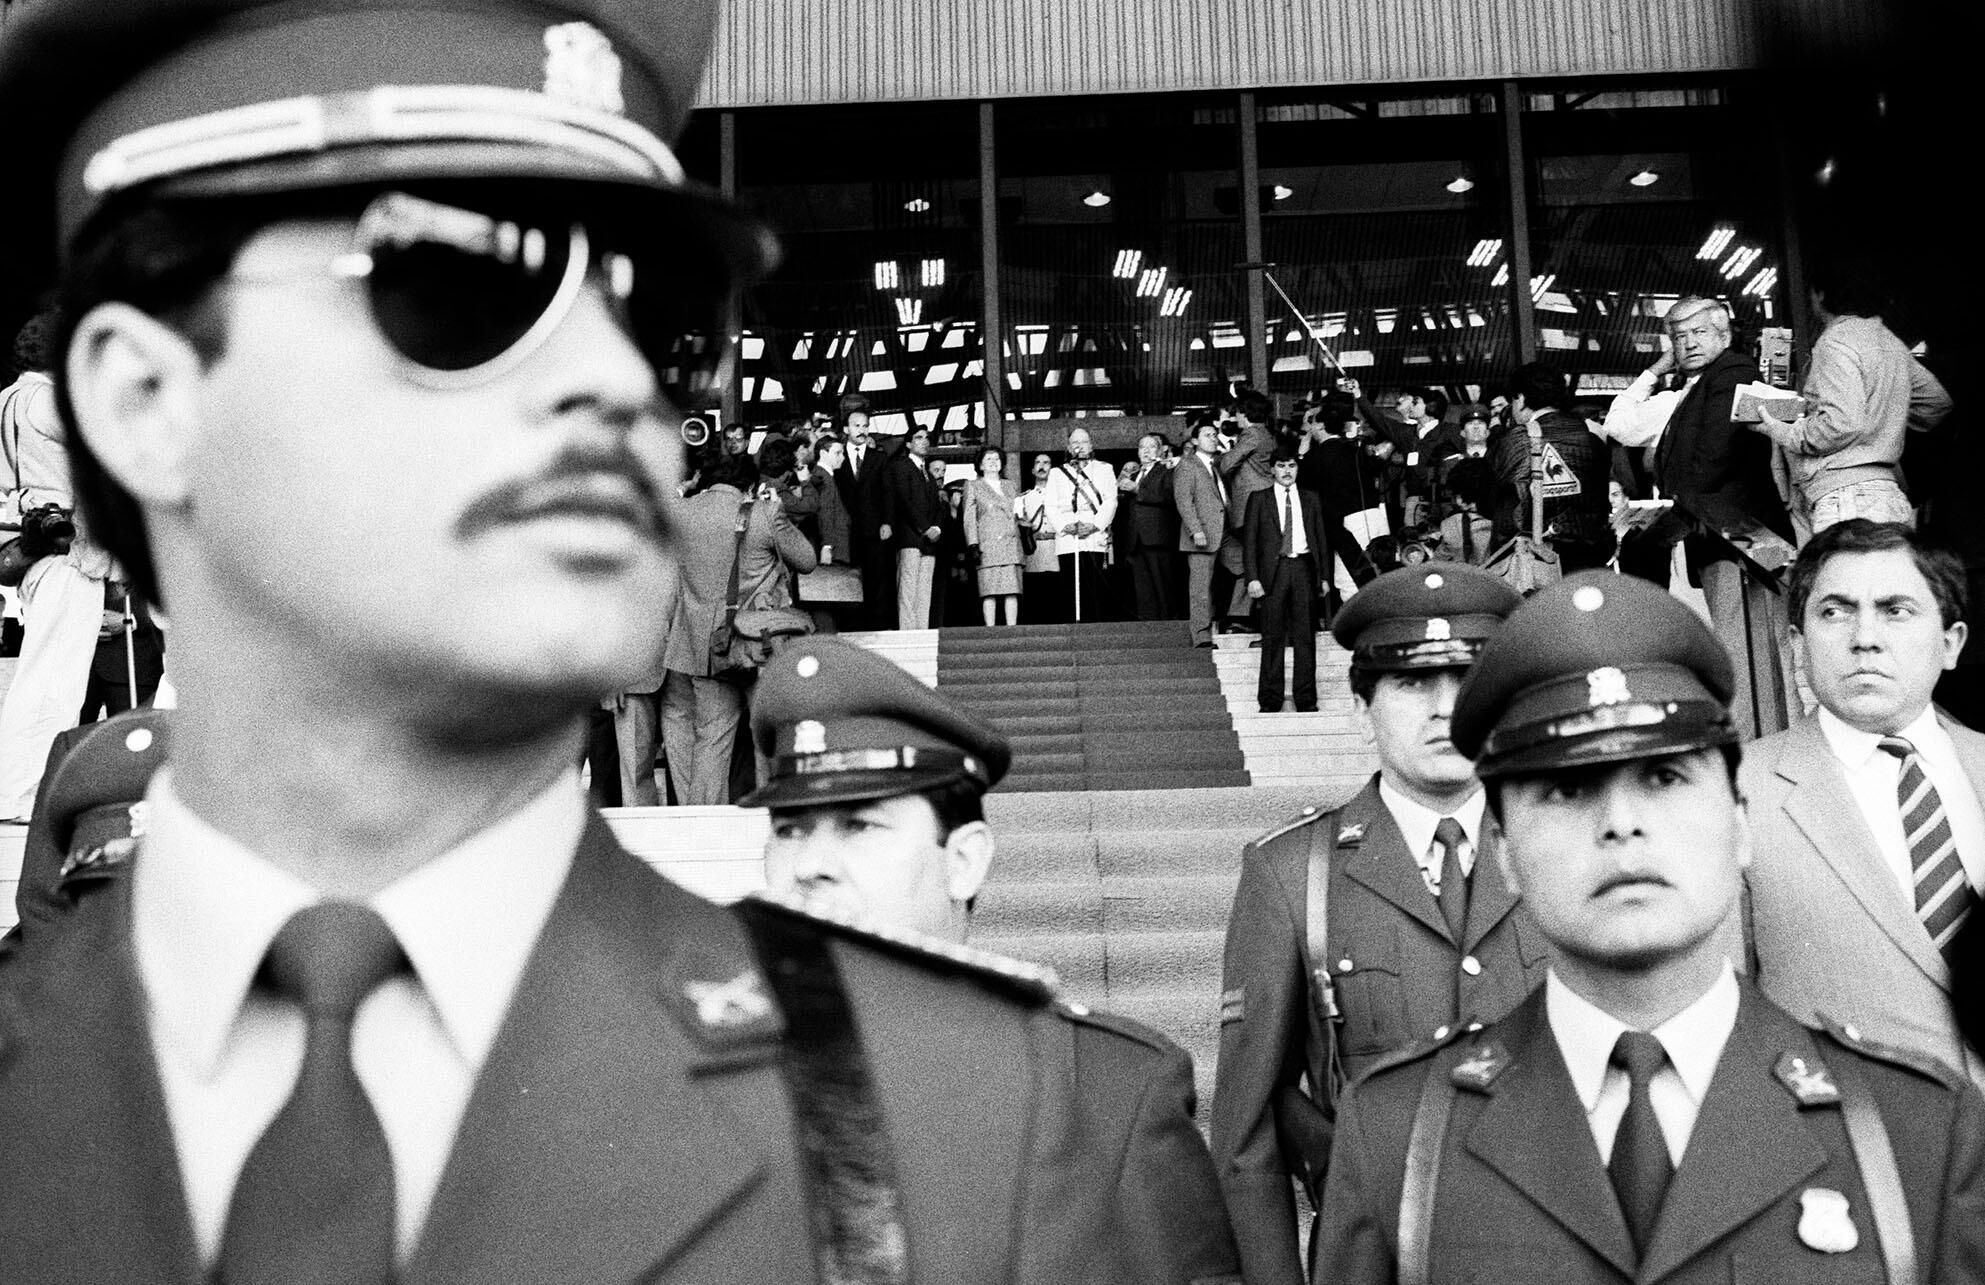 Guards in sunglasses protect Pinochet, standing at the podium at the top of stairs during a 1988 rally. (Photo by Marcelo Montecino.)